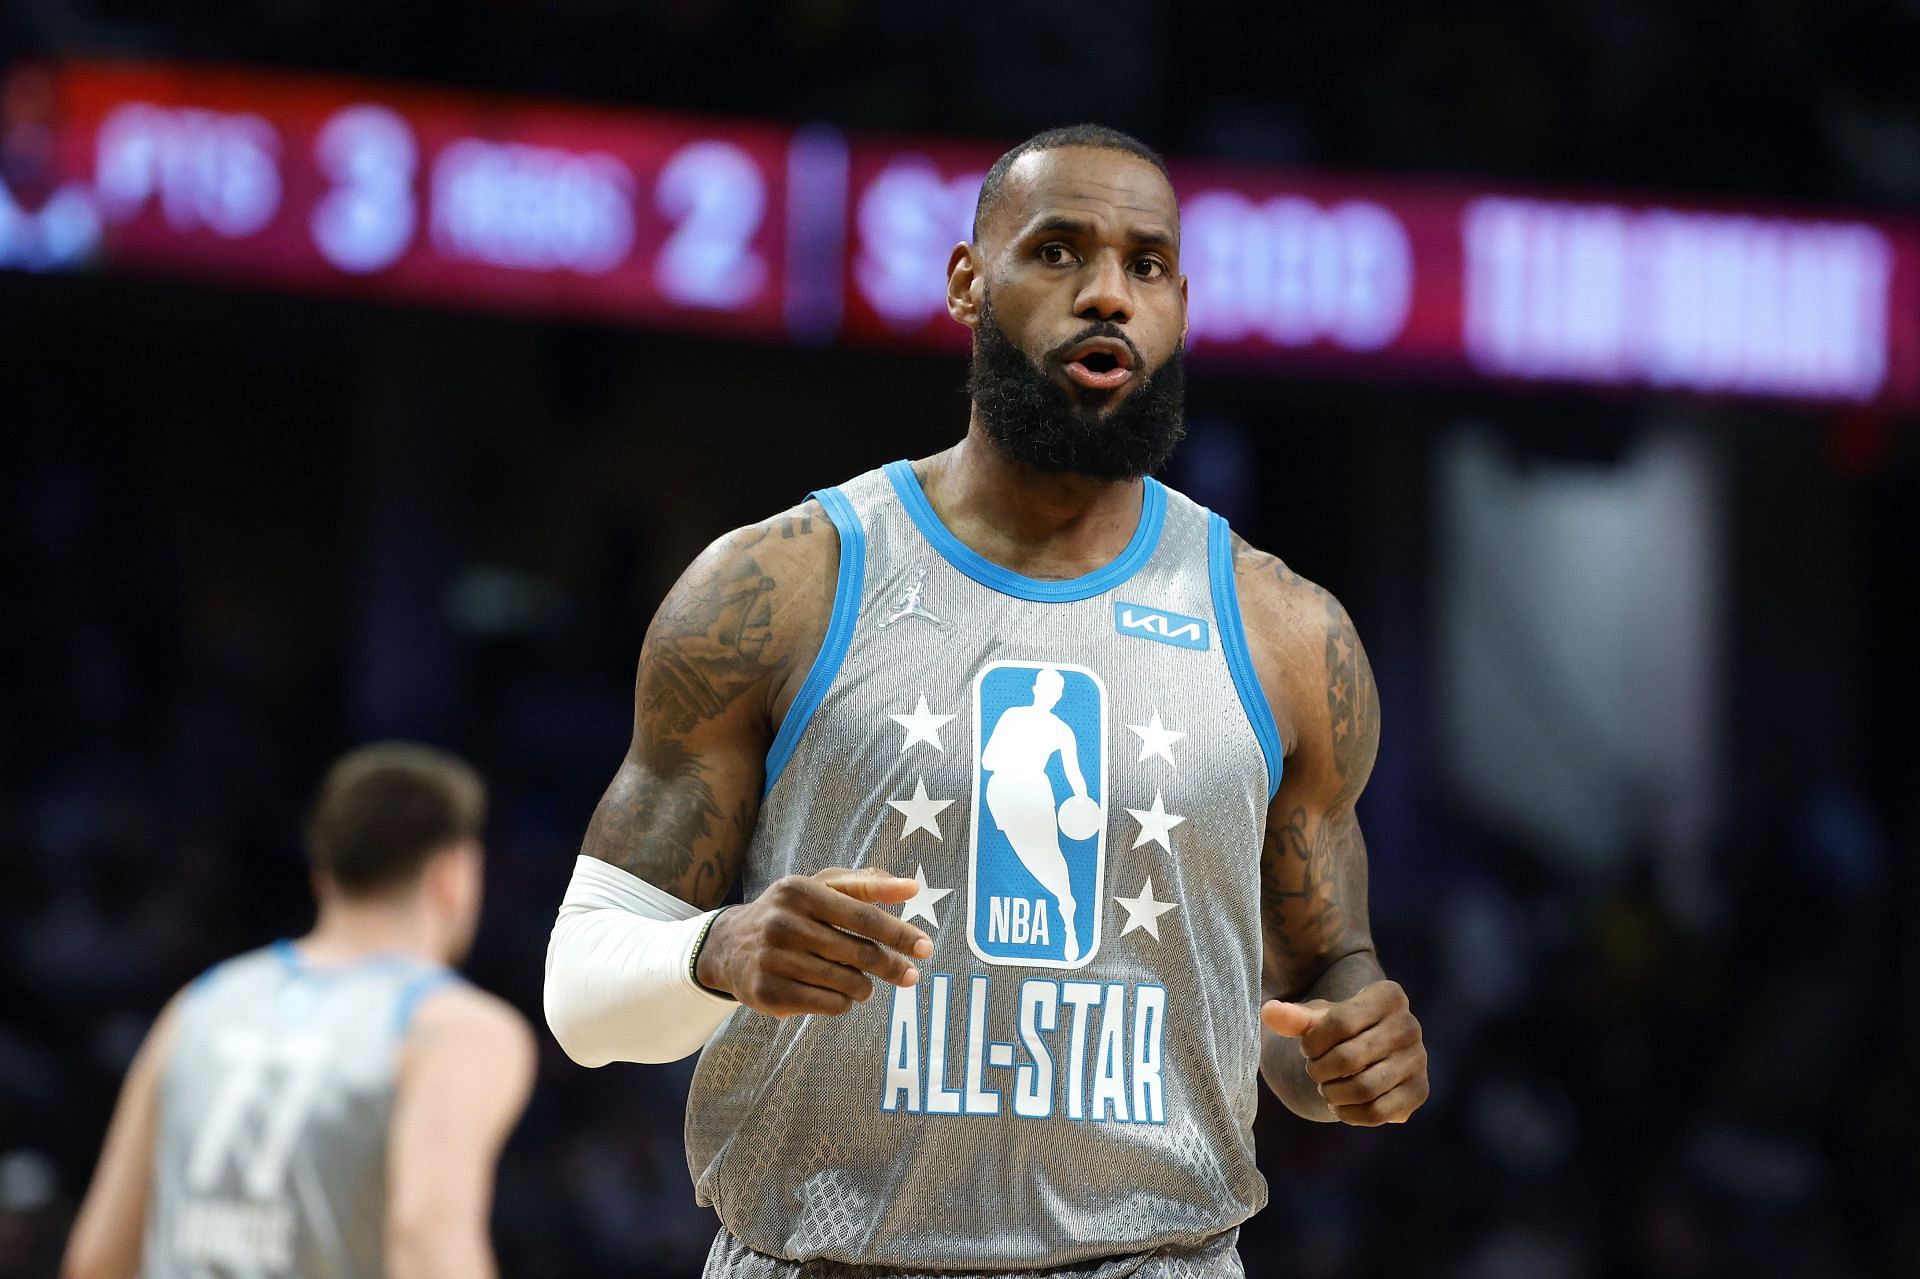 Enter caption LeBron James during the NBA All-Star Game